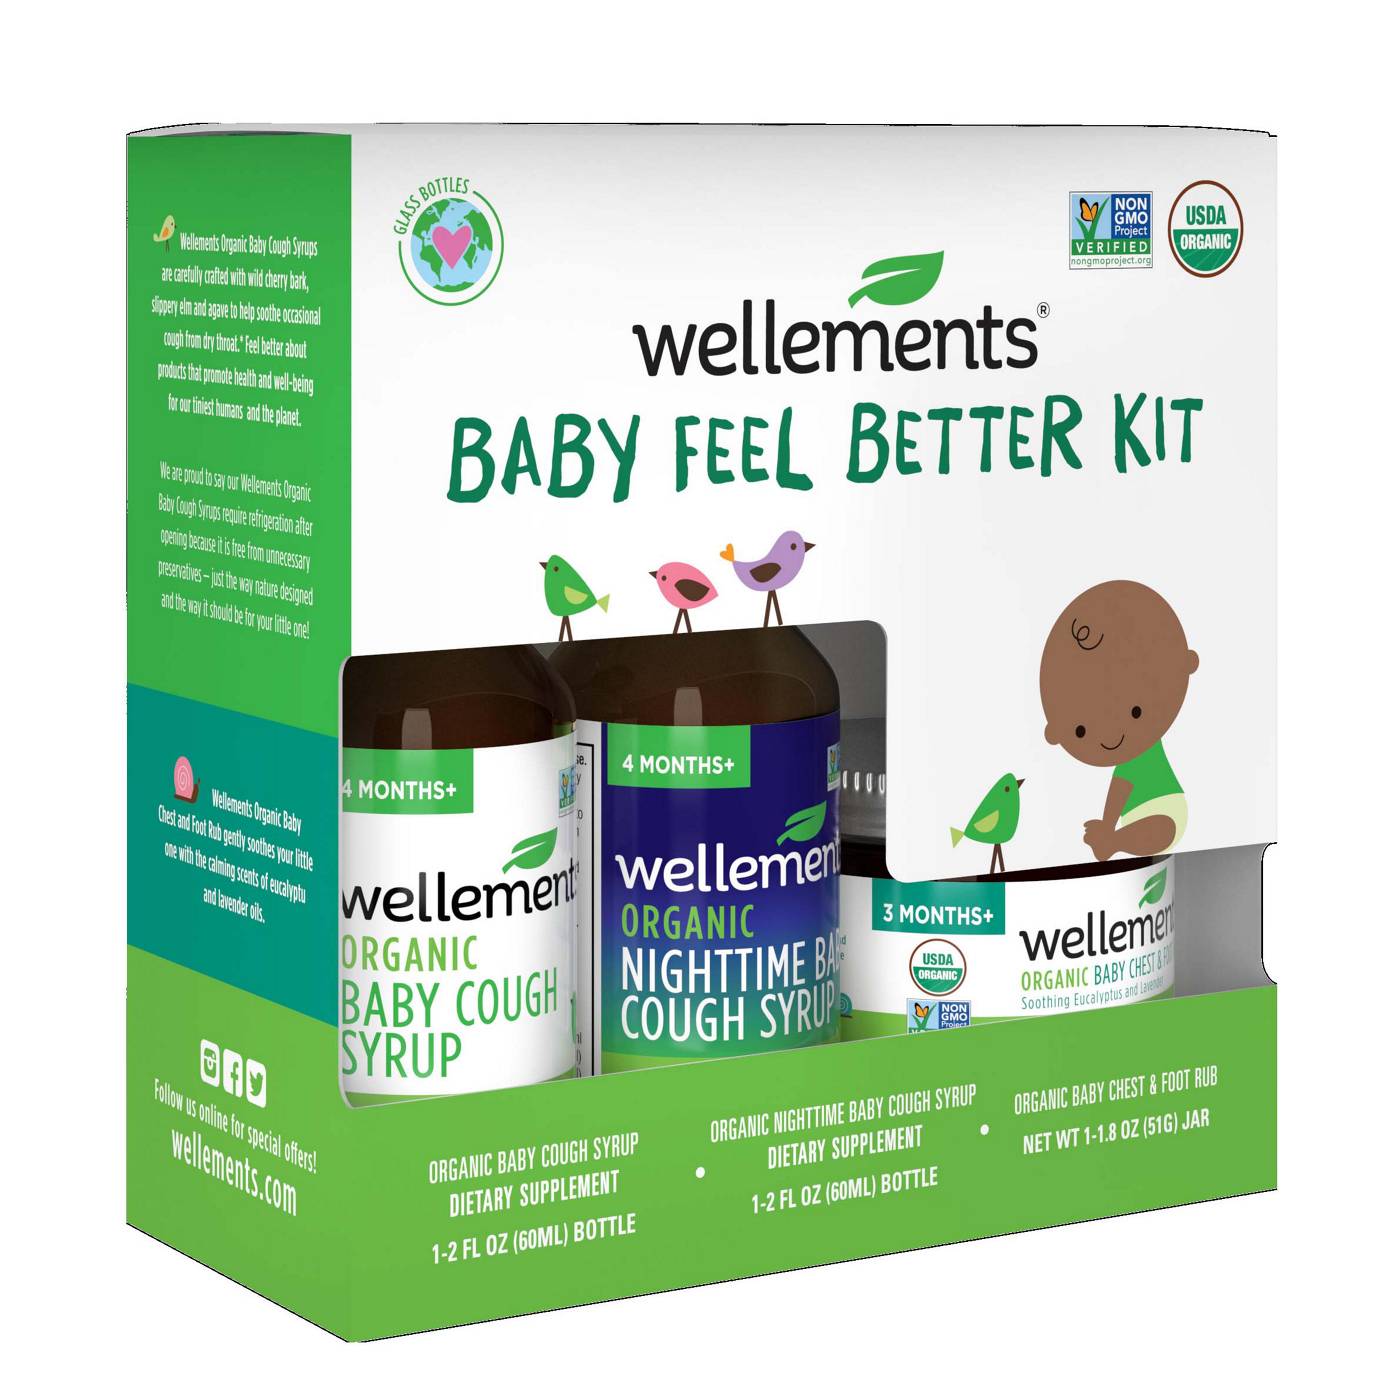 Wellements Baby Feel Better Kit; image 1 of 2